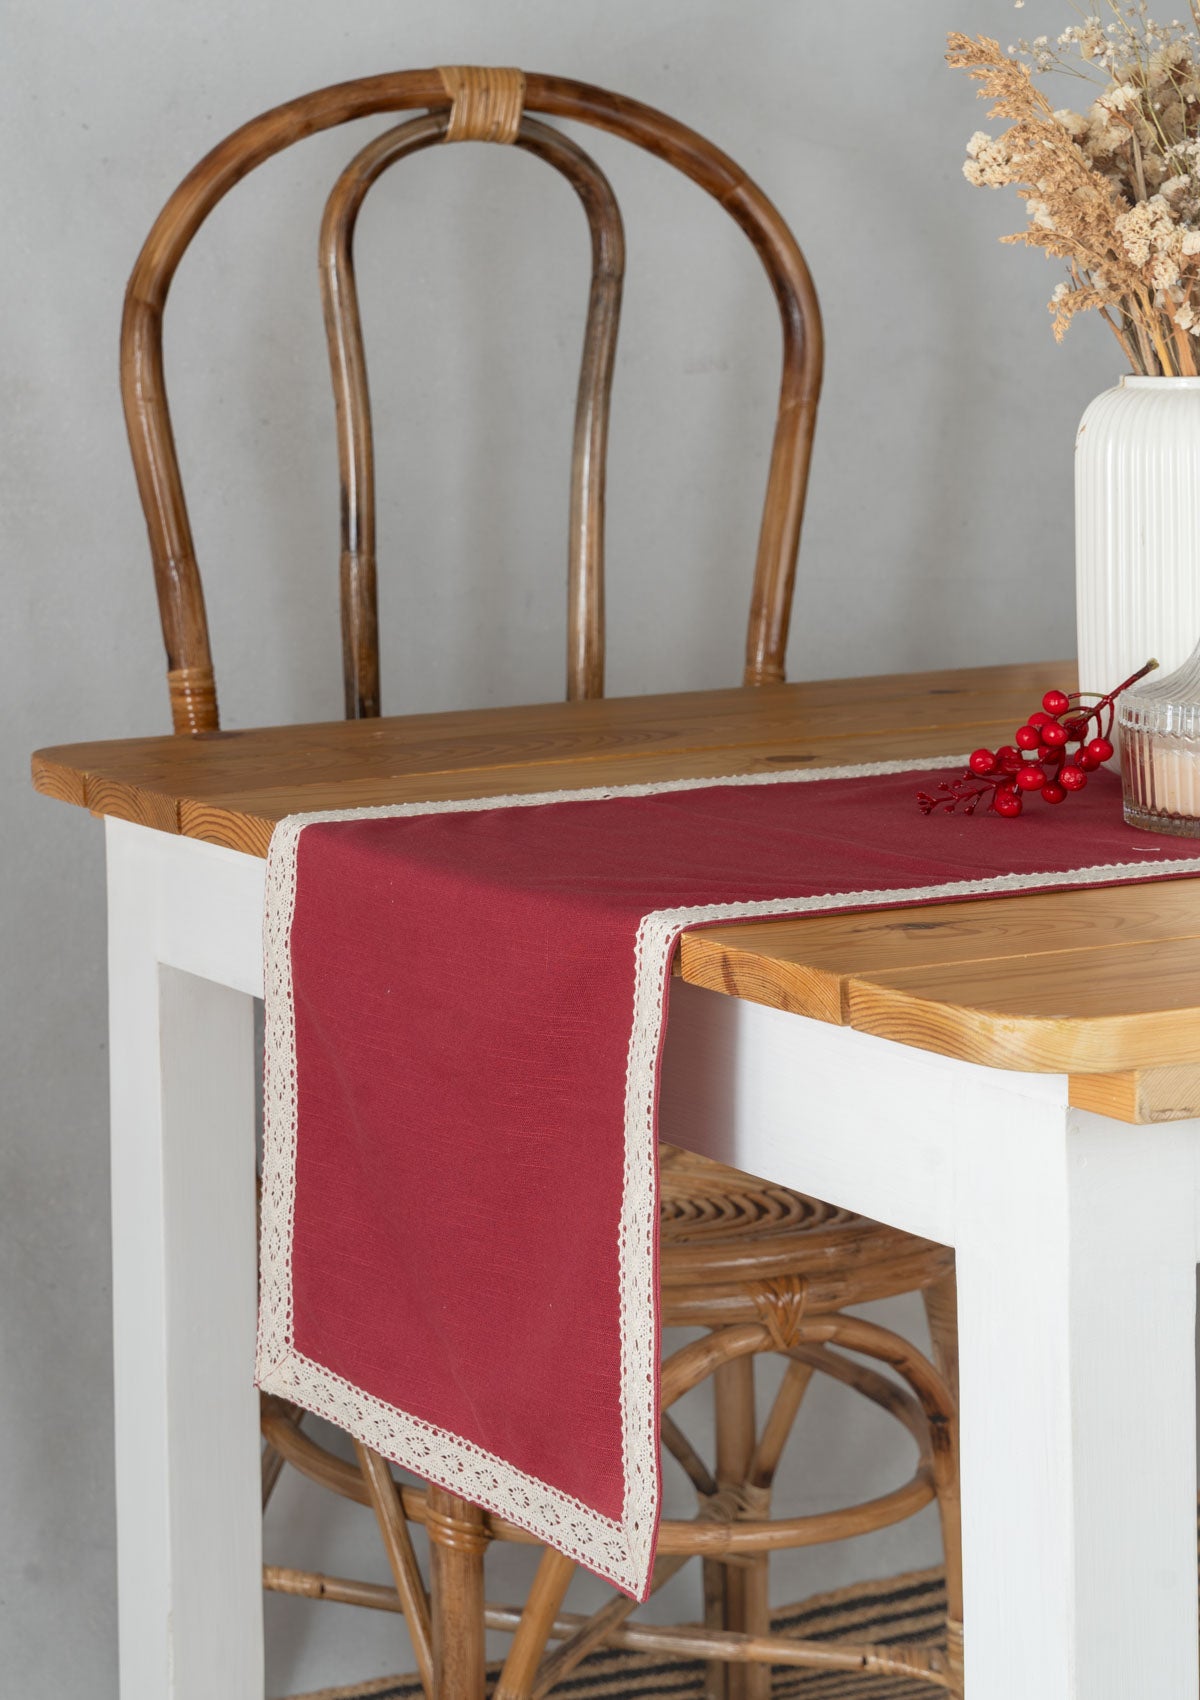 Solid wine red 100% cotton plain table runner for 4 seater or 6 seater dining with lace boarder - Wine red